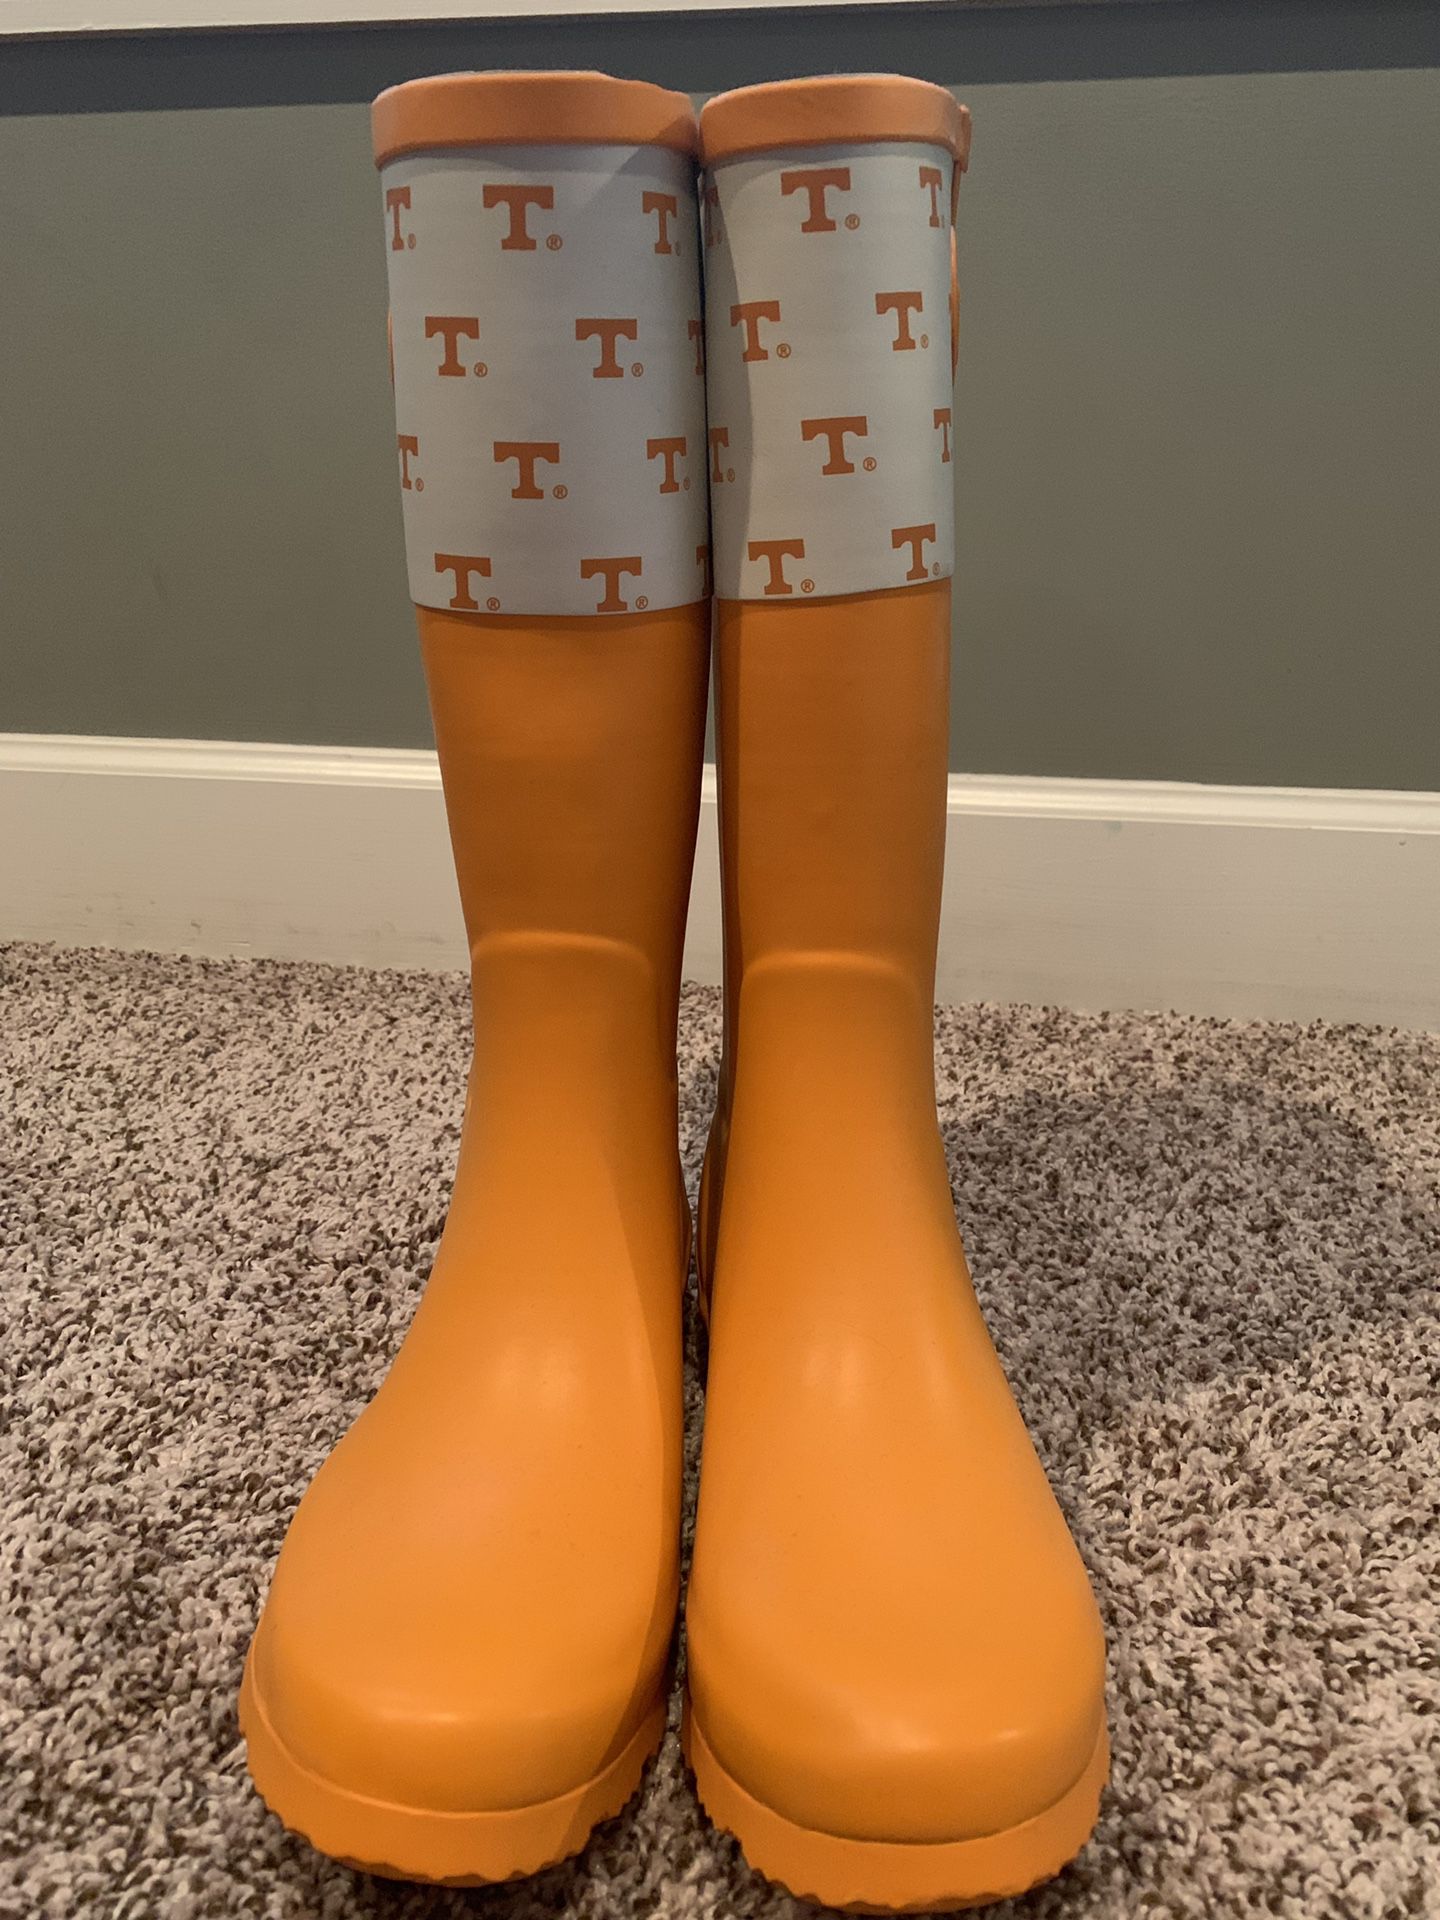 PRICE REDUCTION Brand New UT TENNESSEE rain boots Size 9